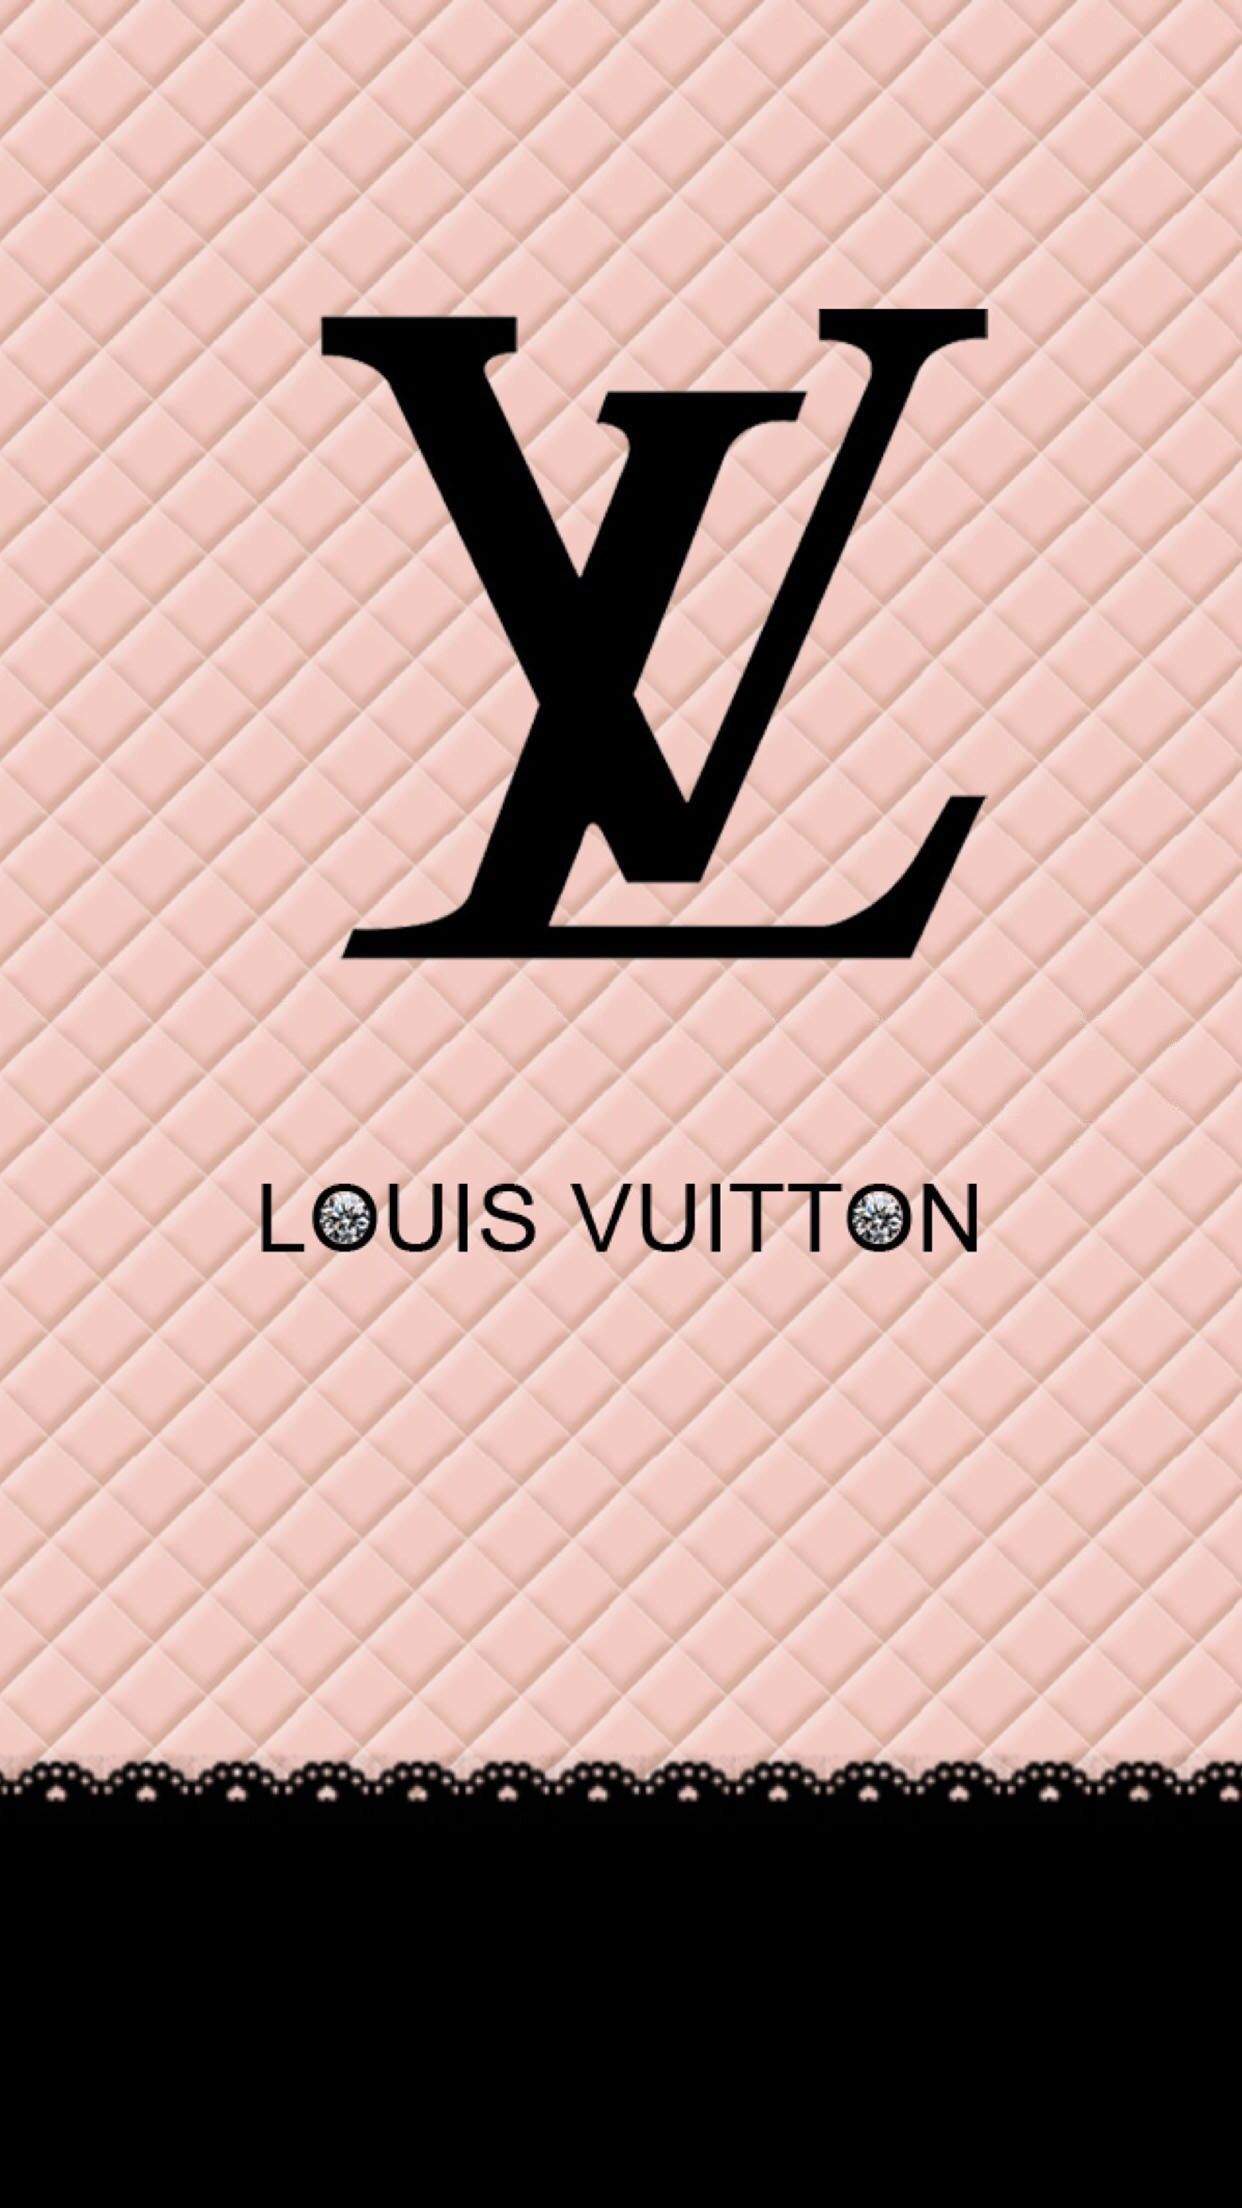 Louis Vuitton Wallpaper Discover more Background, cool, Iphone, Logo, Pink  wallpapers. h…